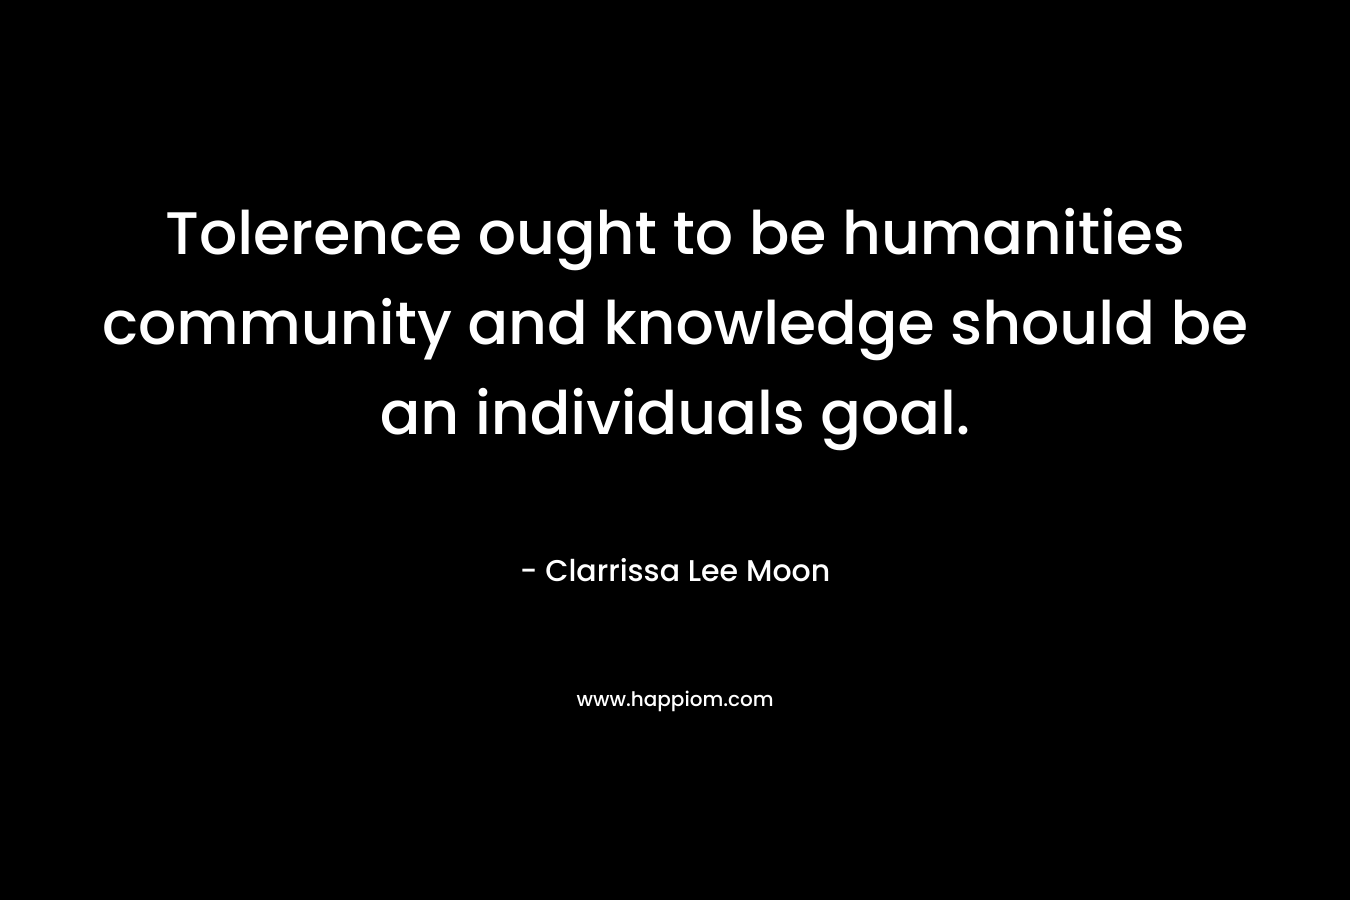 Tolerence ought to be humanities community and knowledge should be an individuals goal.